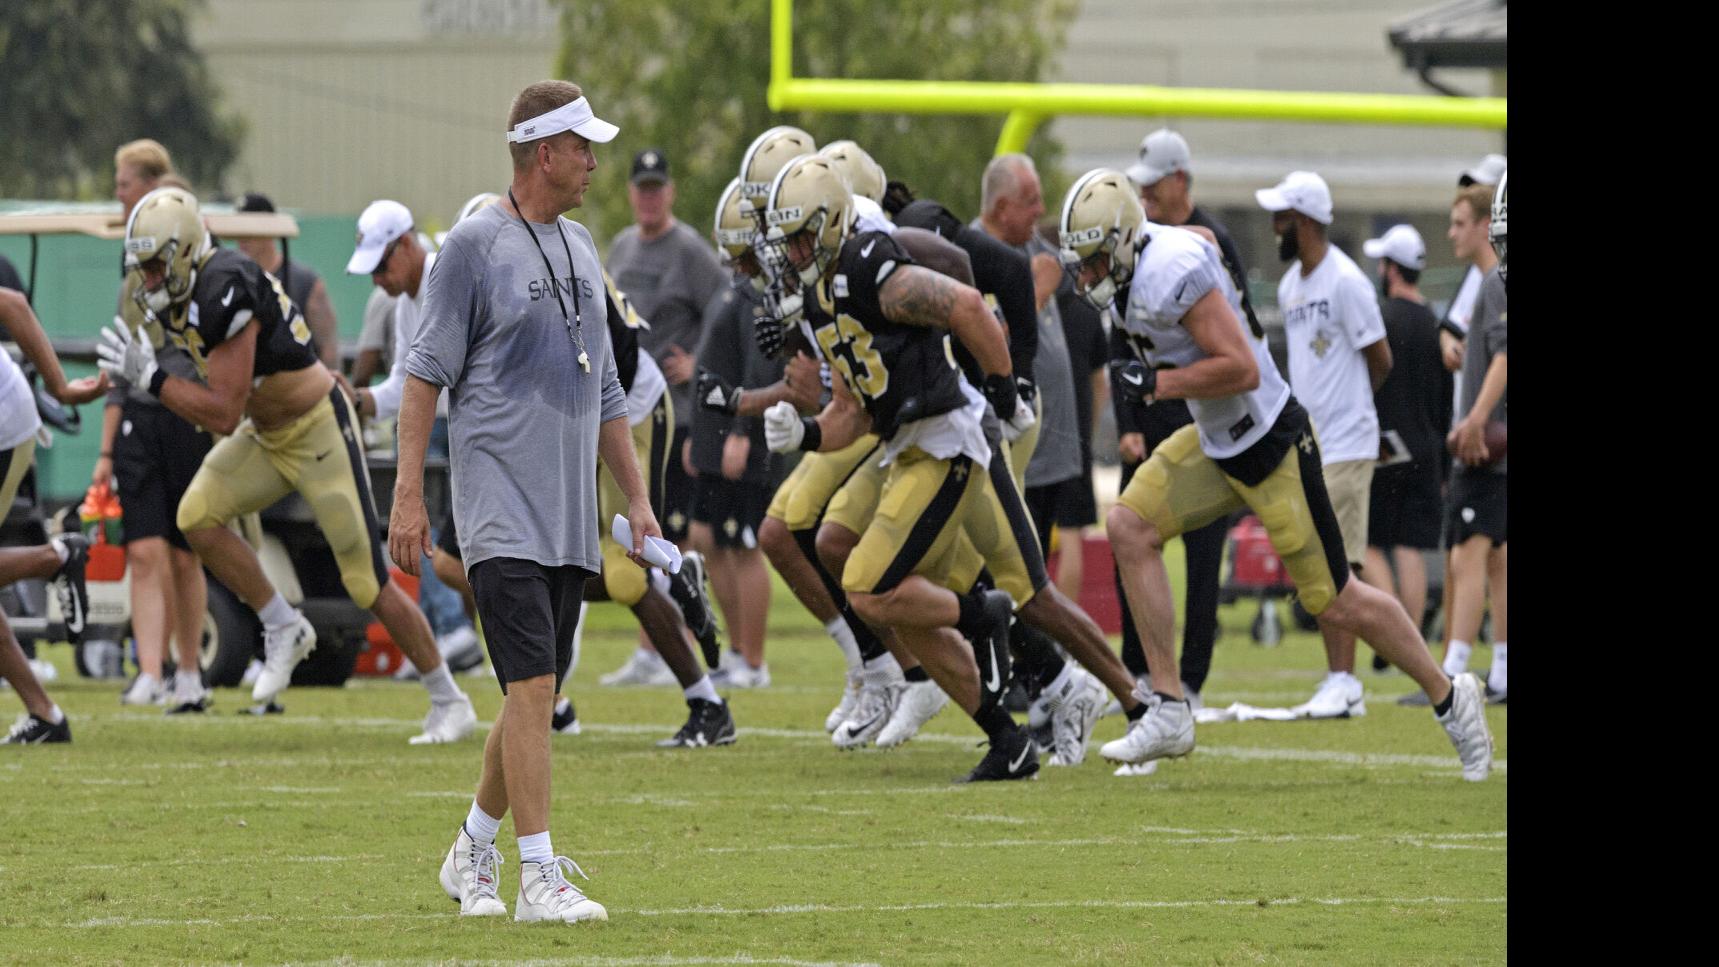 Nfl Training Camps Are Set To Begin The Coronavirus Is Still Here Here S How The Saints Will Navigate Both Saints Nola Com